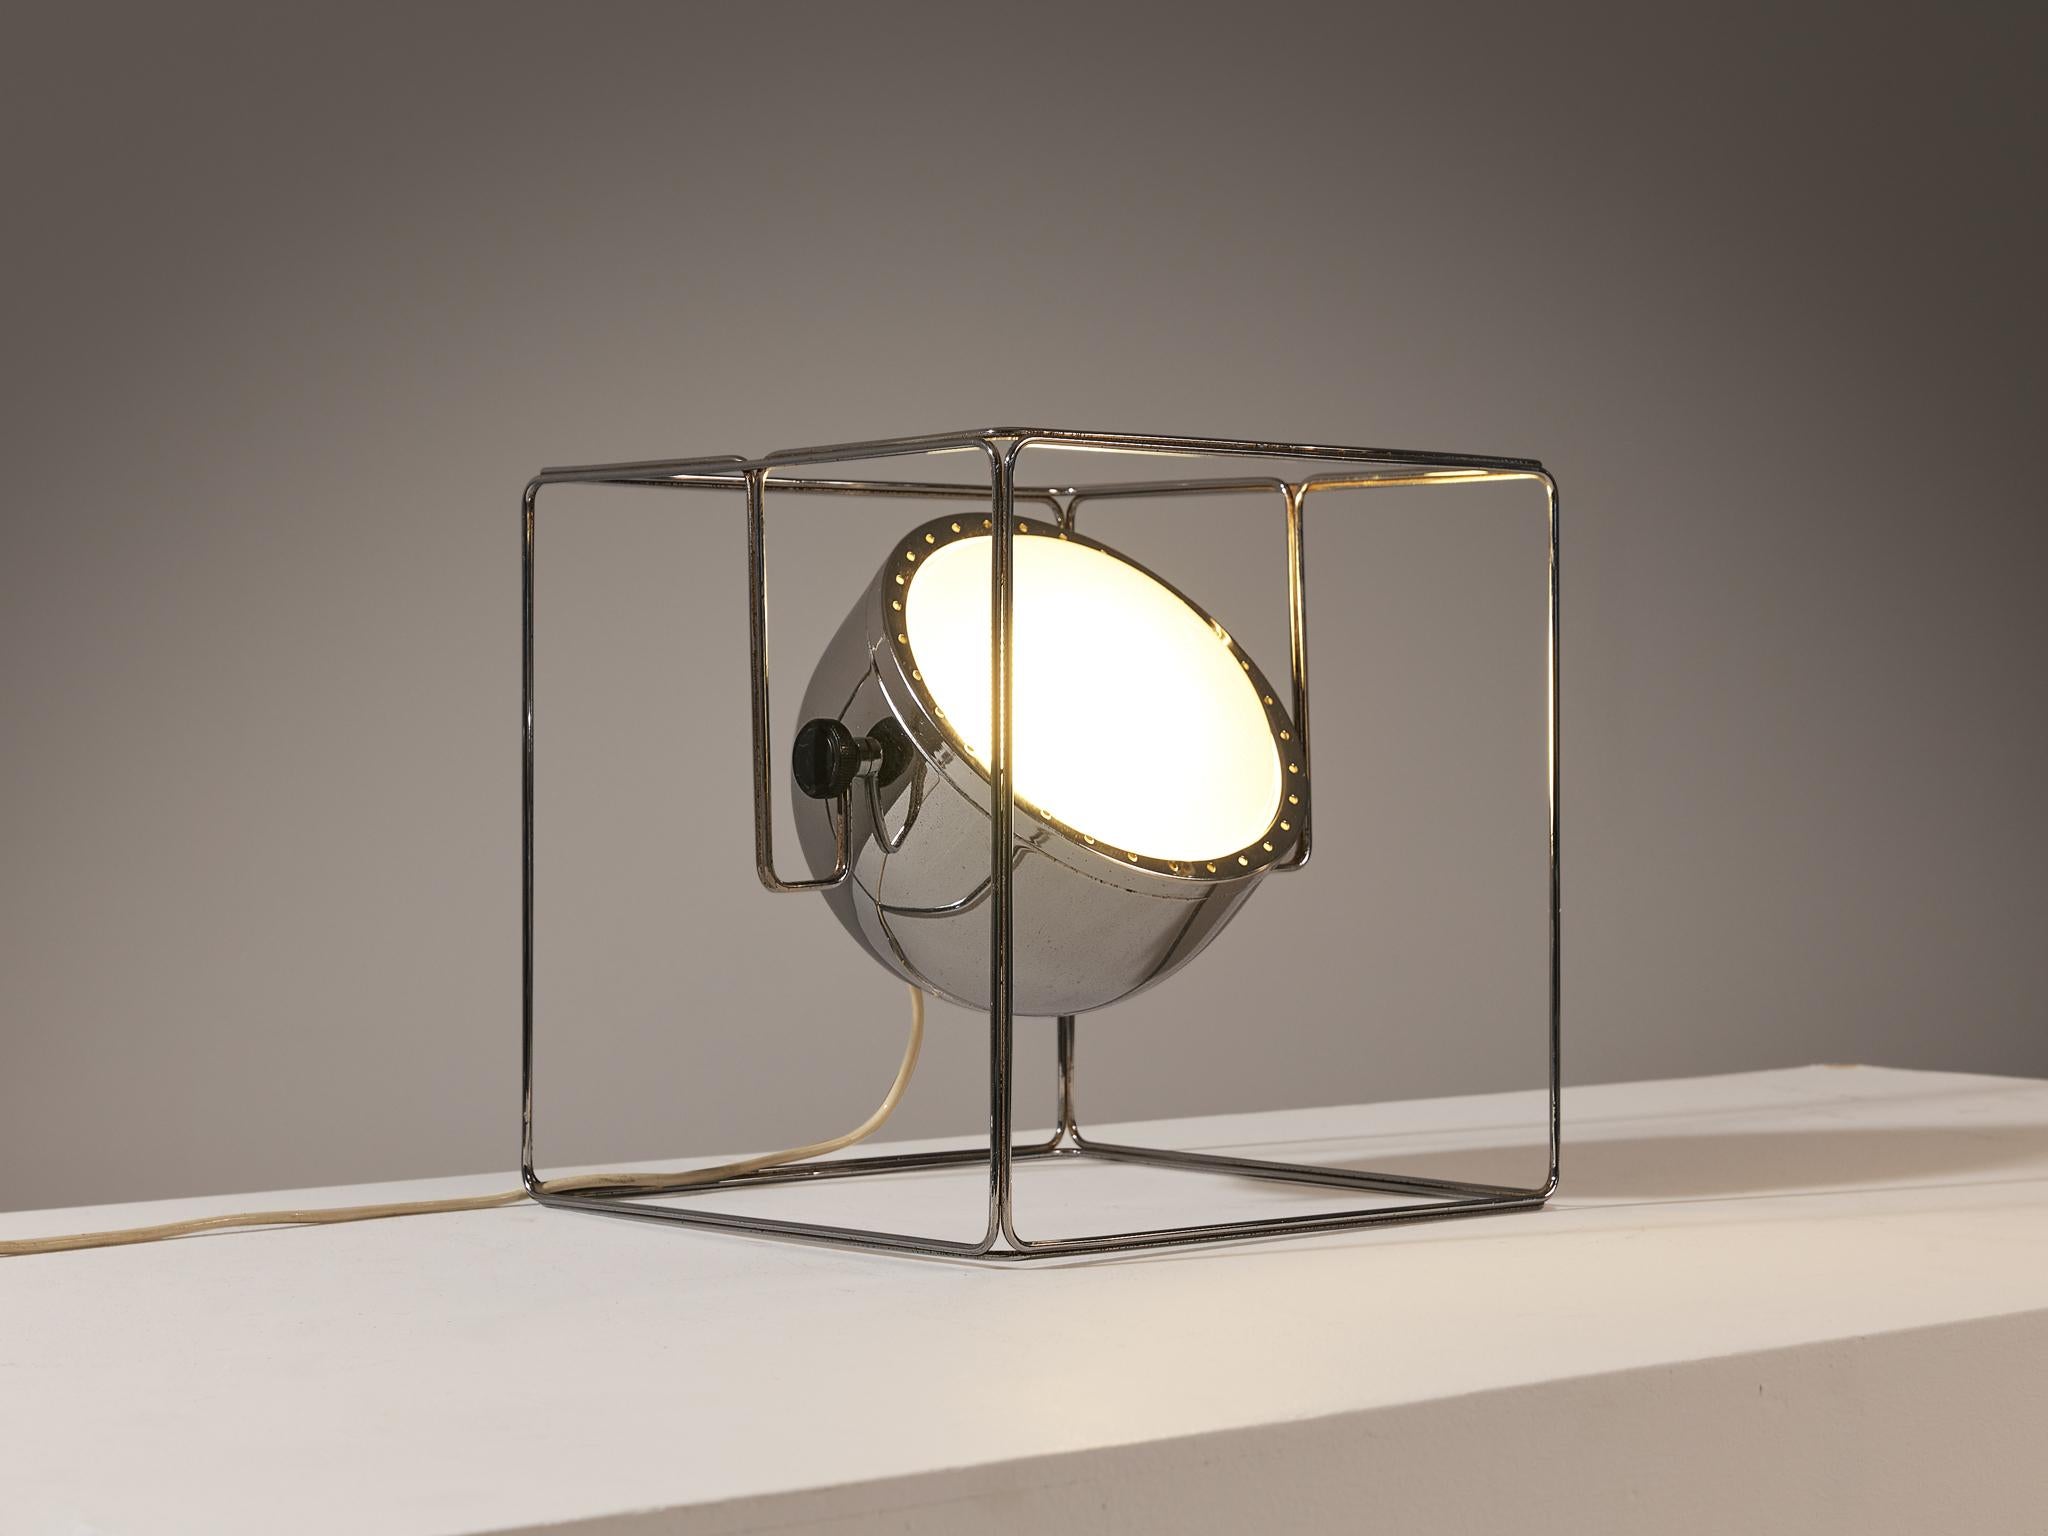 Idea Studio Tecno Design for LUCI, table lamp, model 'T469', chrome-plated steel, glass, Italy, 1960s

A progressive lighting object designed in the sixties by Idea Studio Tecno Design. The construction holds a minimalist layout which is established